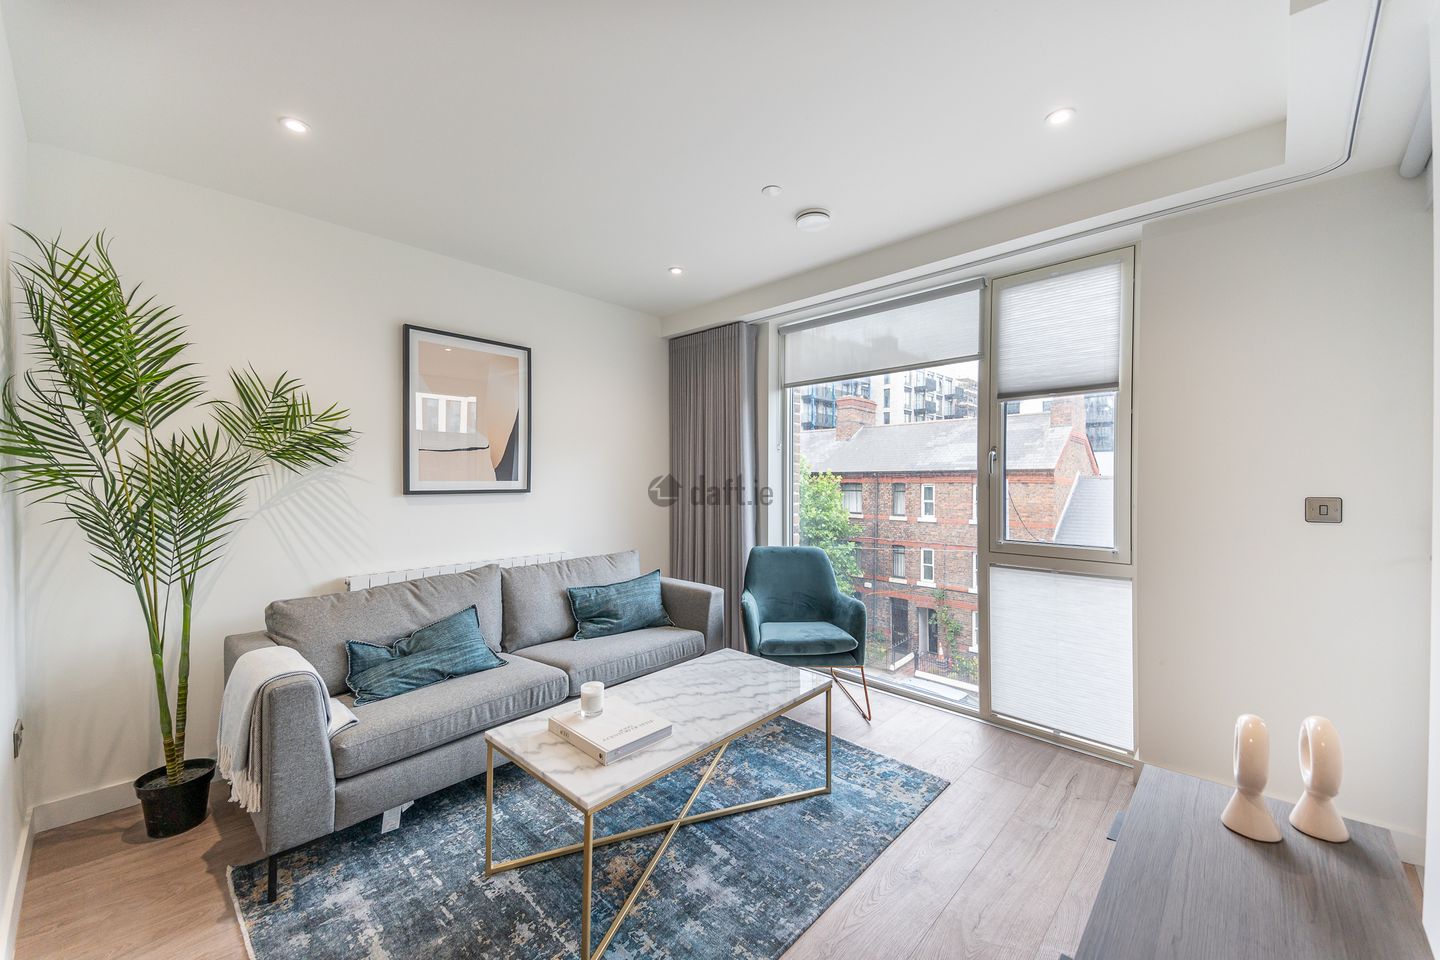 1 Bedroom Apartment, Spencer Place, Spencer Place, Dublin 1